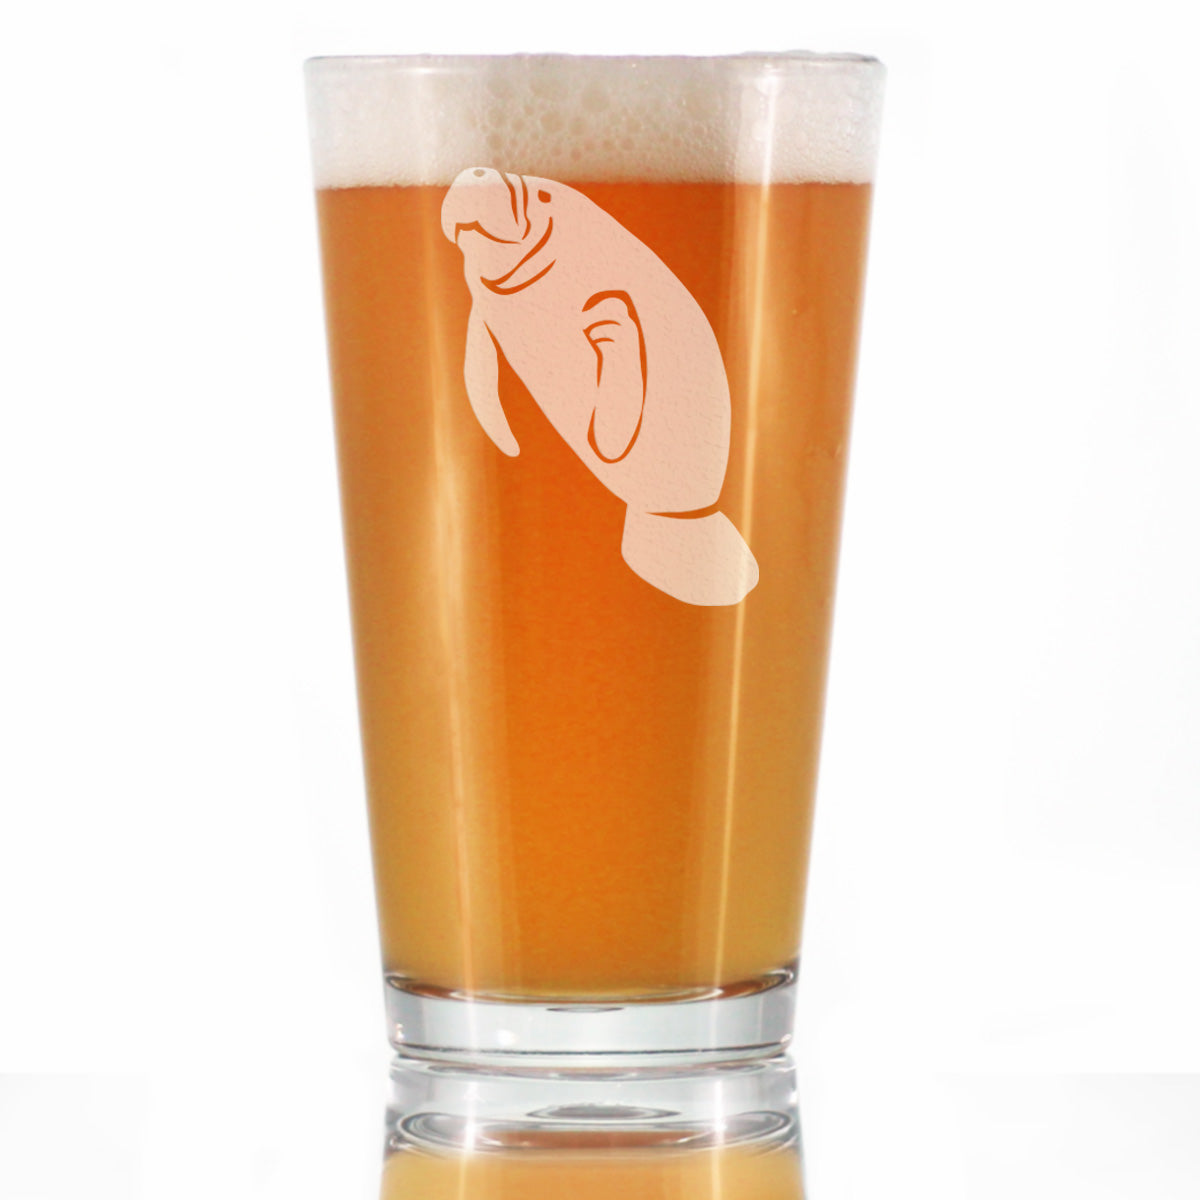 Manatee Pint Glass for Beer - Cute Funny Ocean Animals Themed Decor and Gifts for Sea Creature Lovers - 16 oz